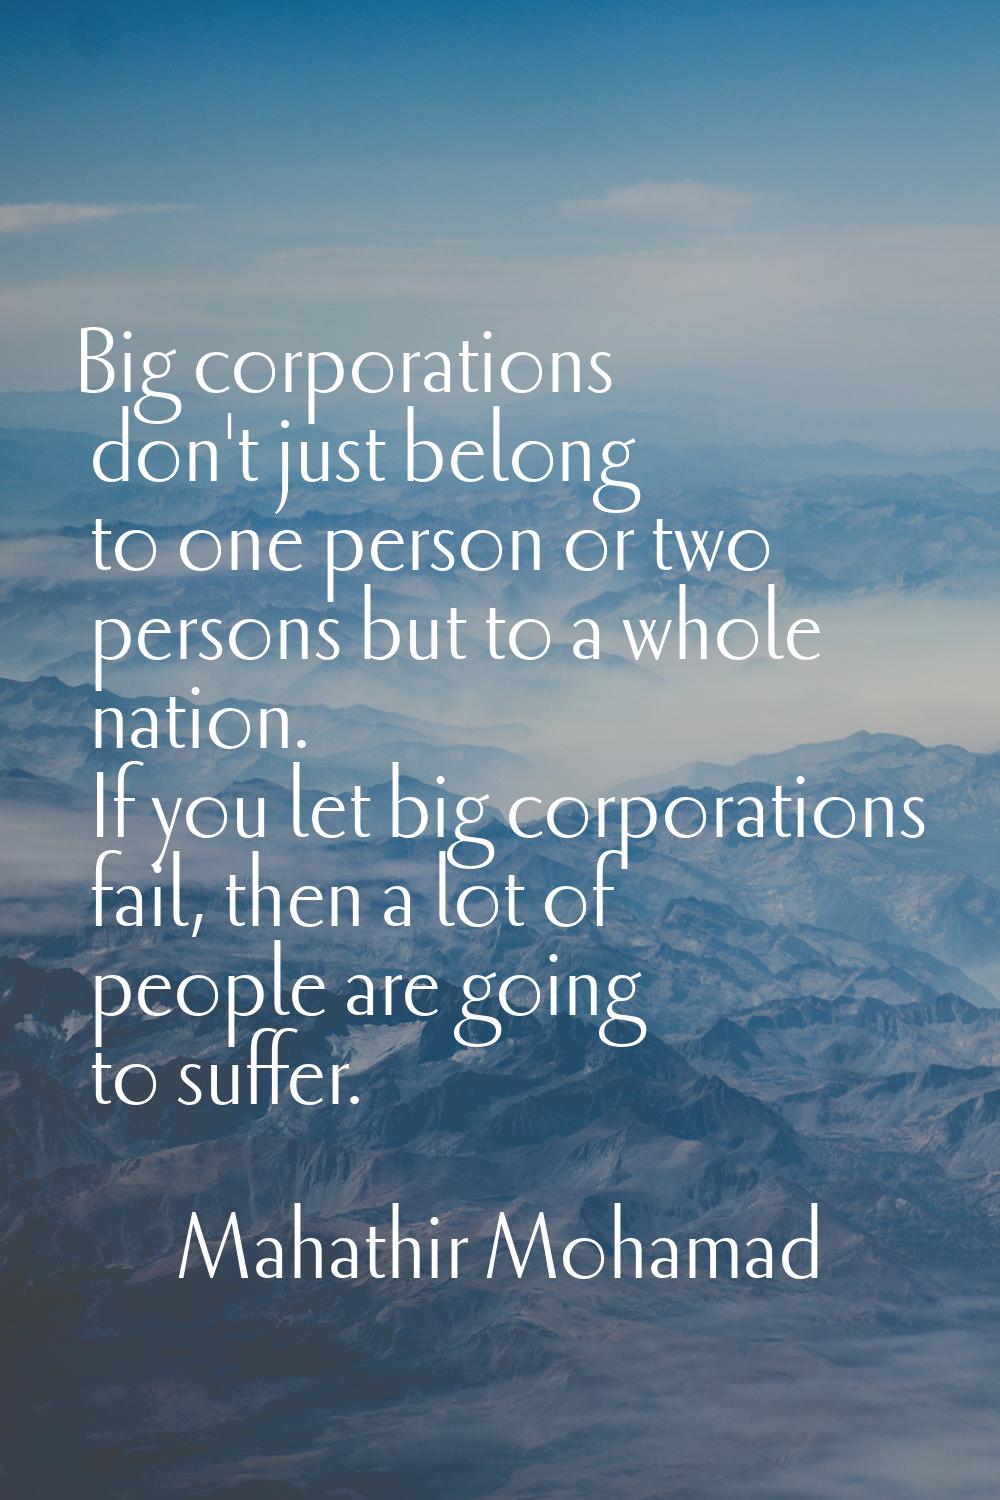 Big corporations don't just belong to one person or two persons but to a whole nation. If you let b